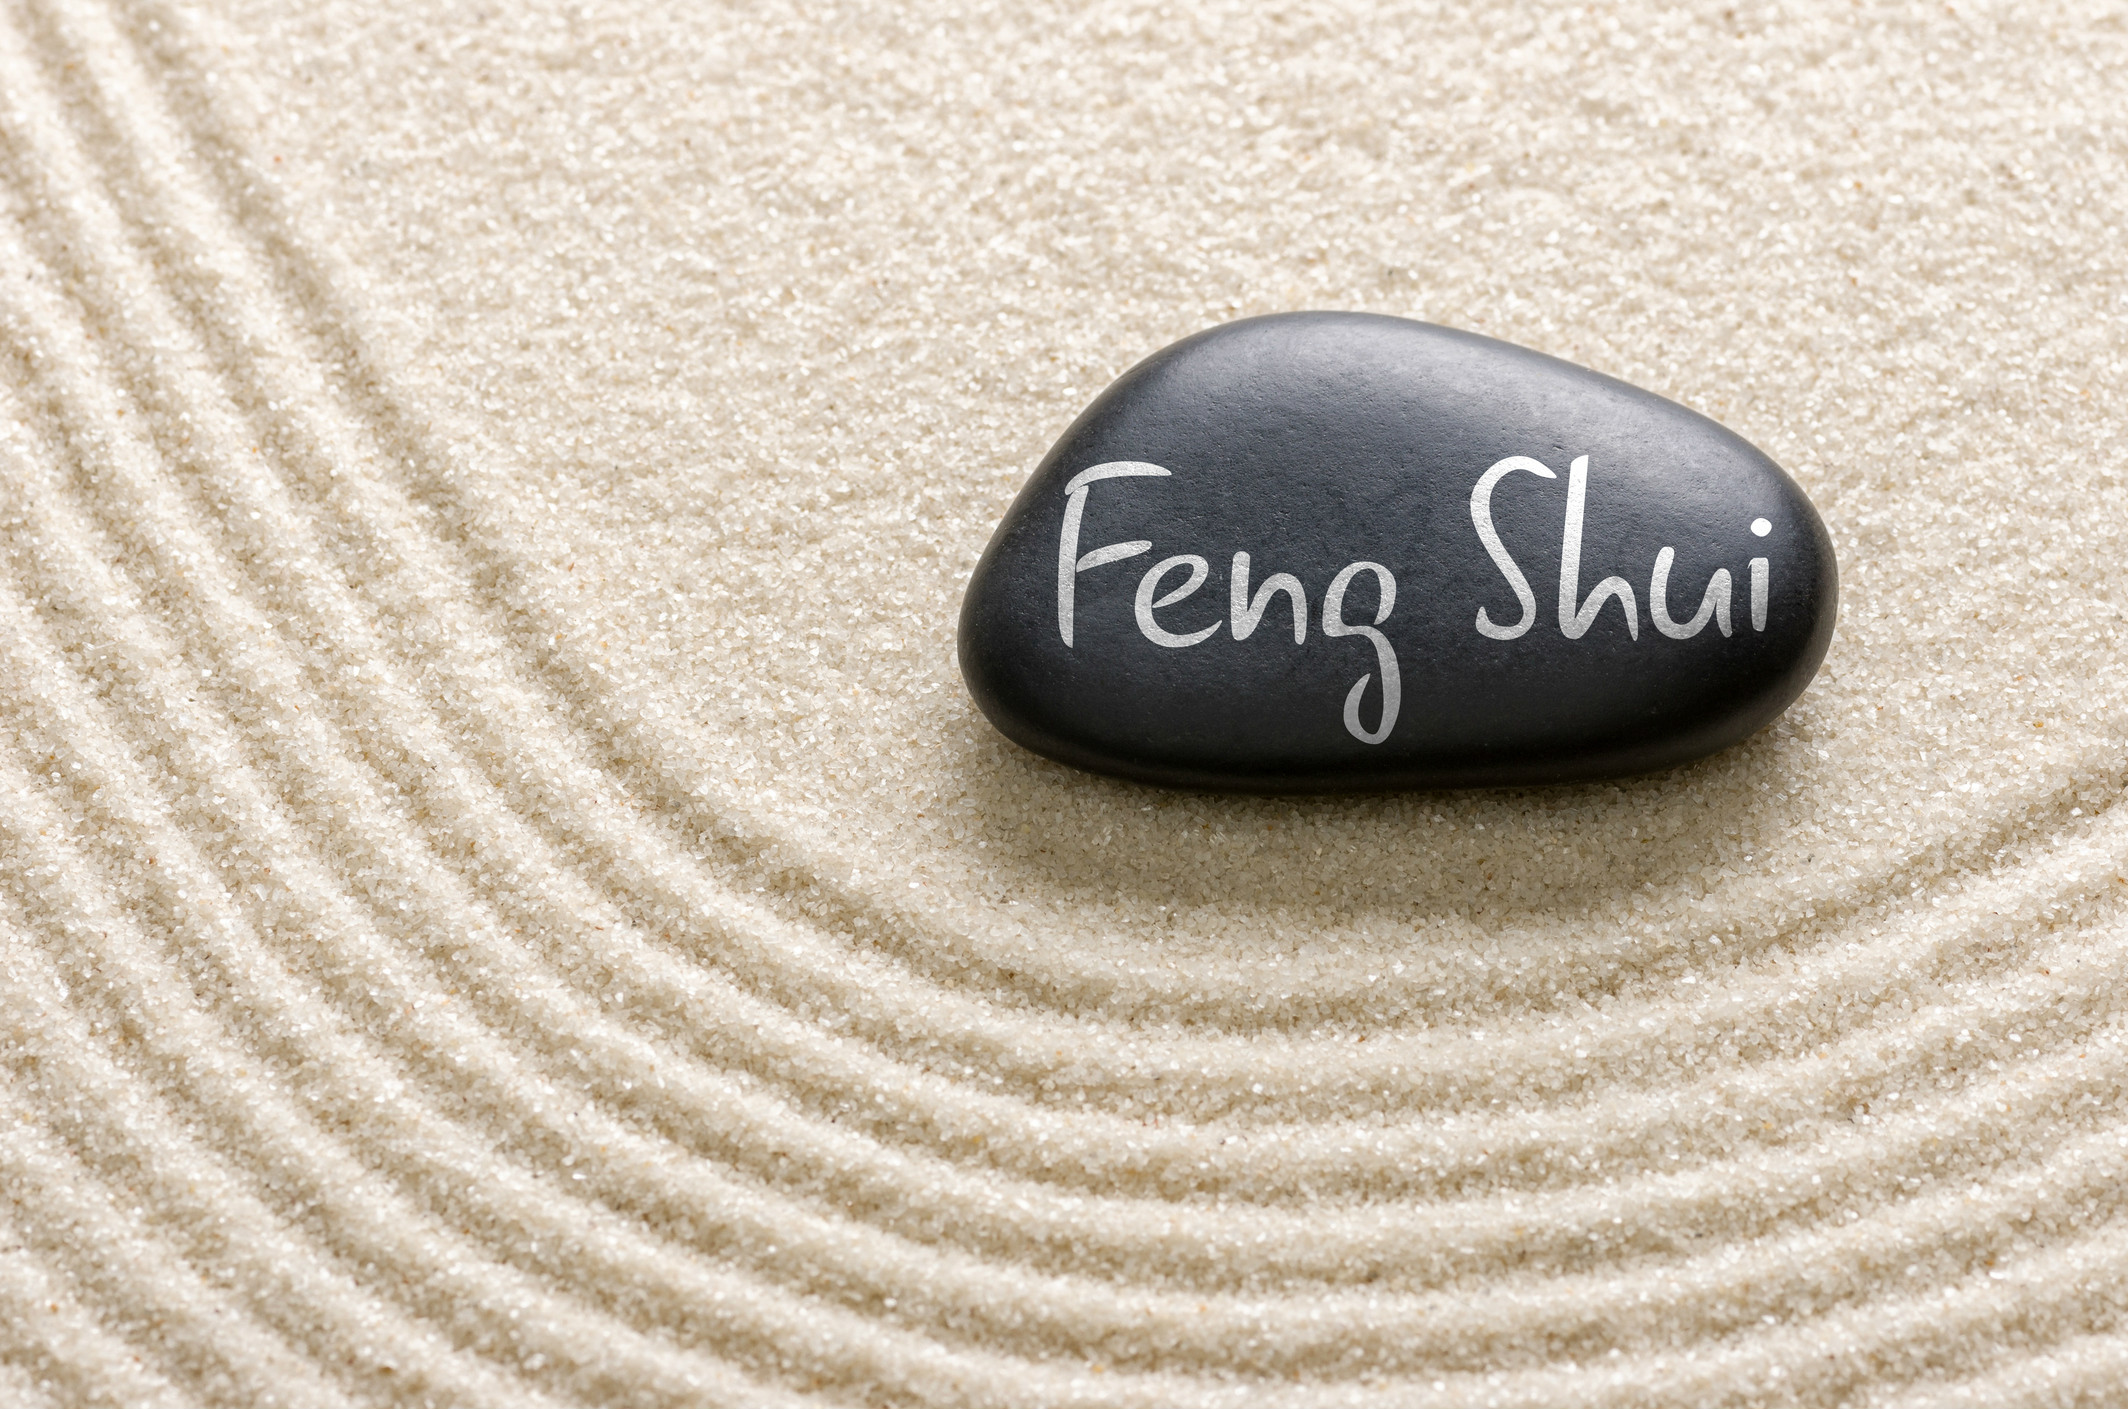 What should you sprinkle in your car for good feng shui?